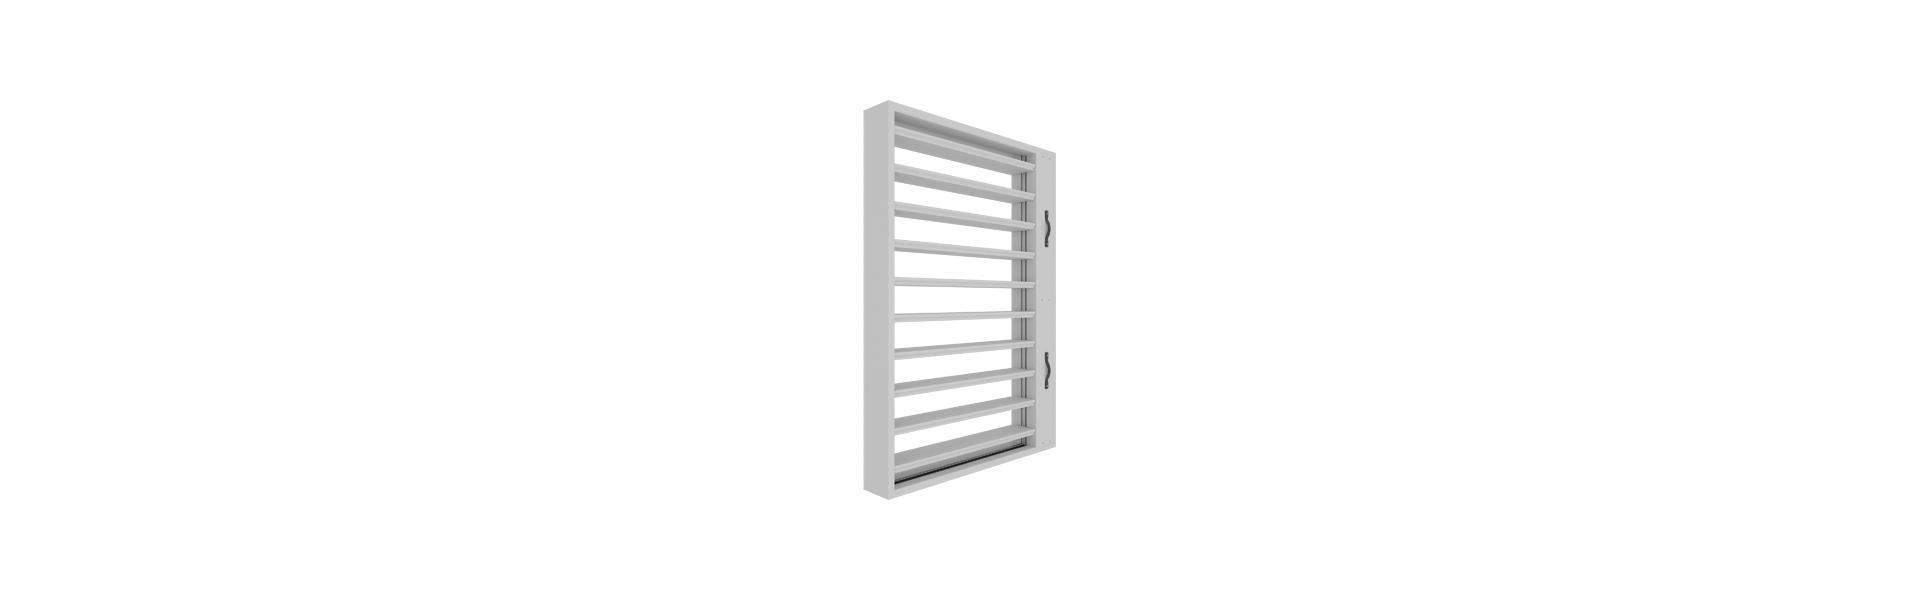 EKM90 multi-blade smoke extraction damper half right from the front